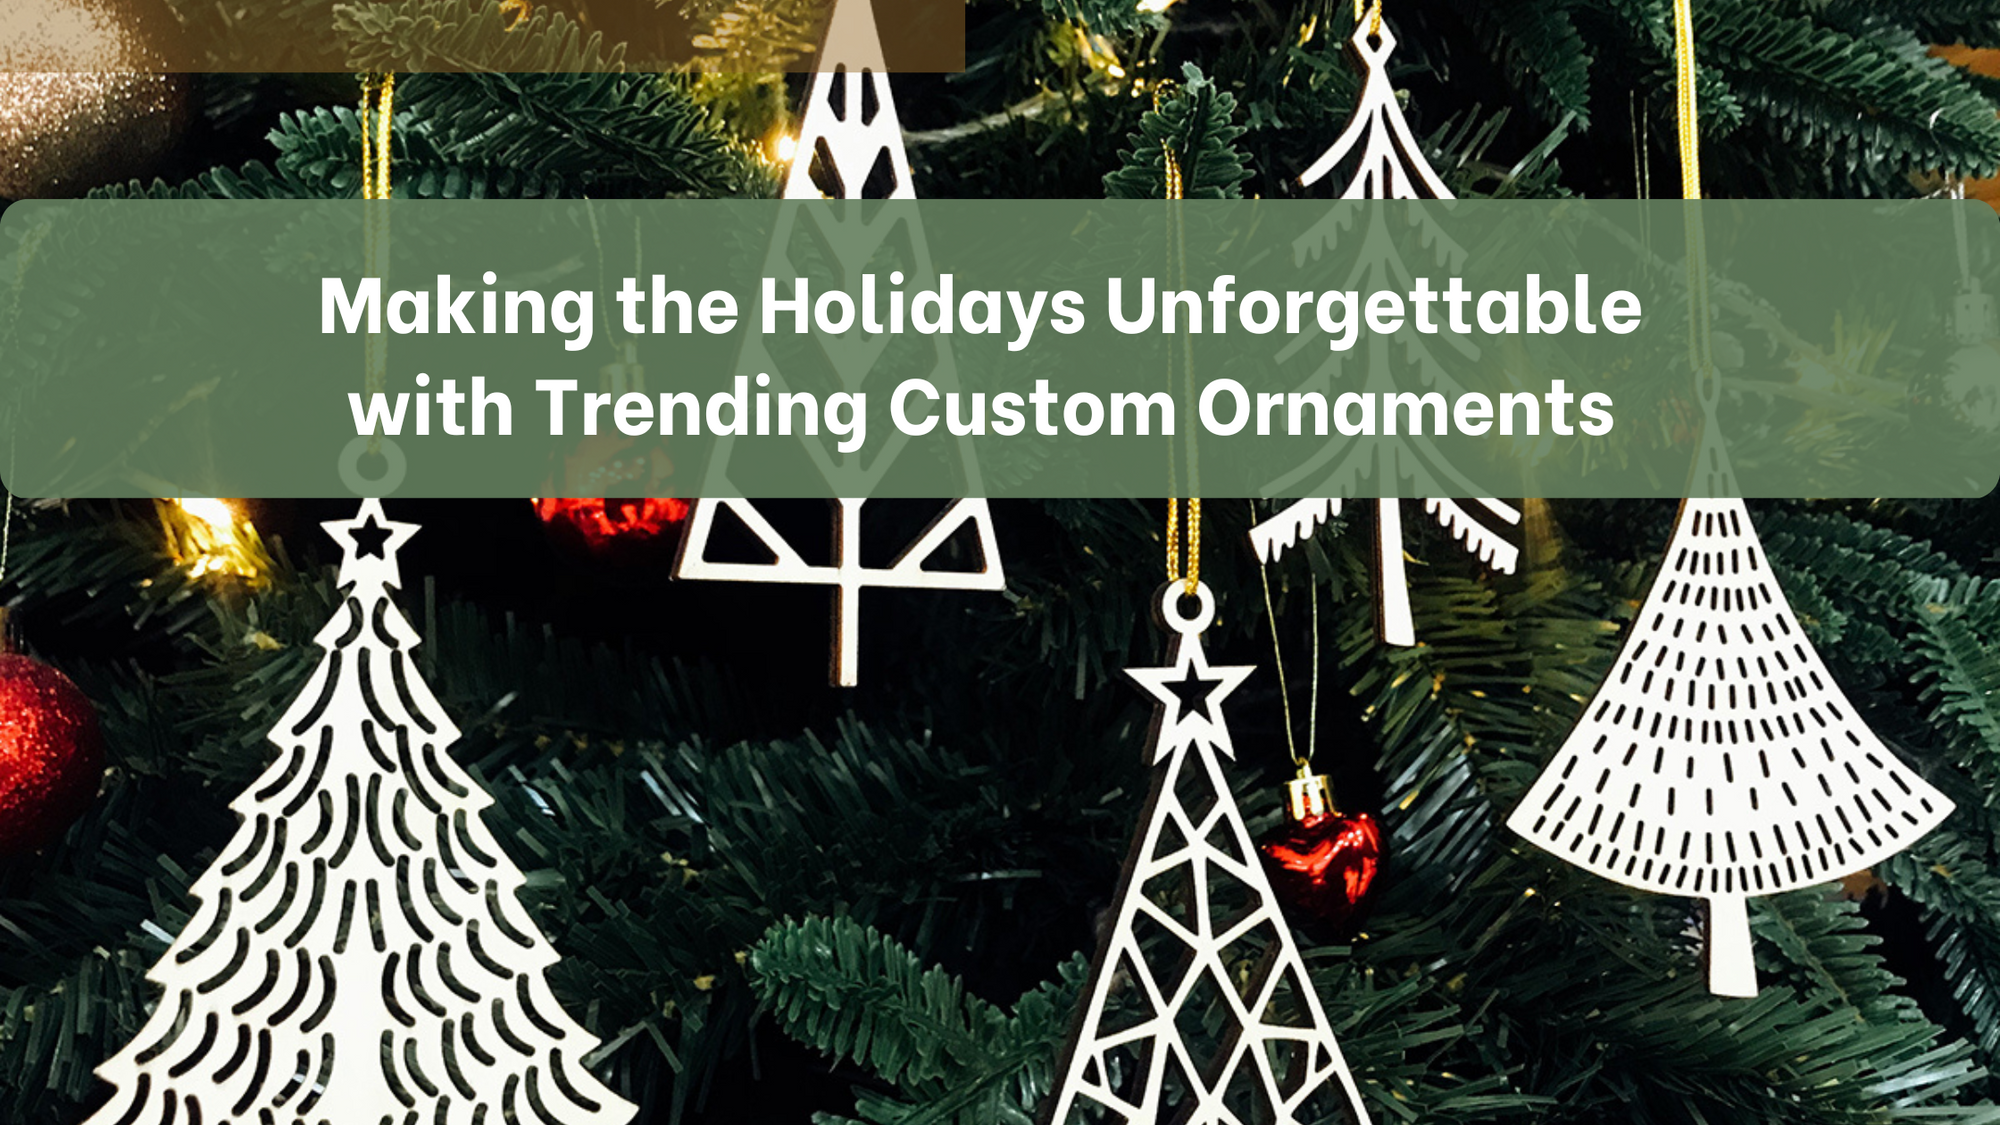 Making the Holidays Unforgettable with TrendingCustom.com's Ornaments